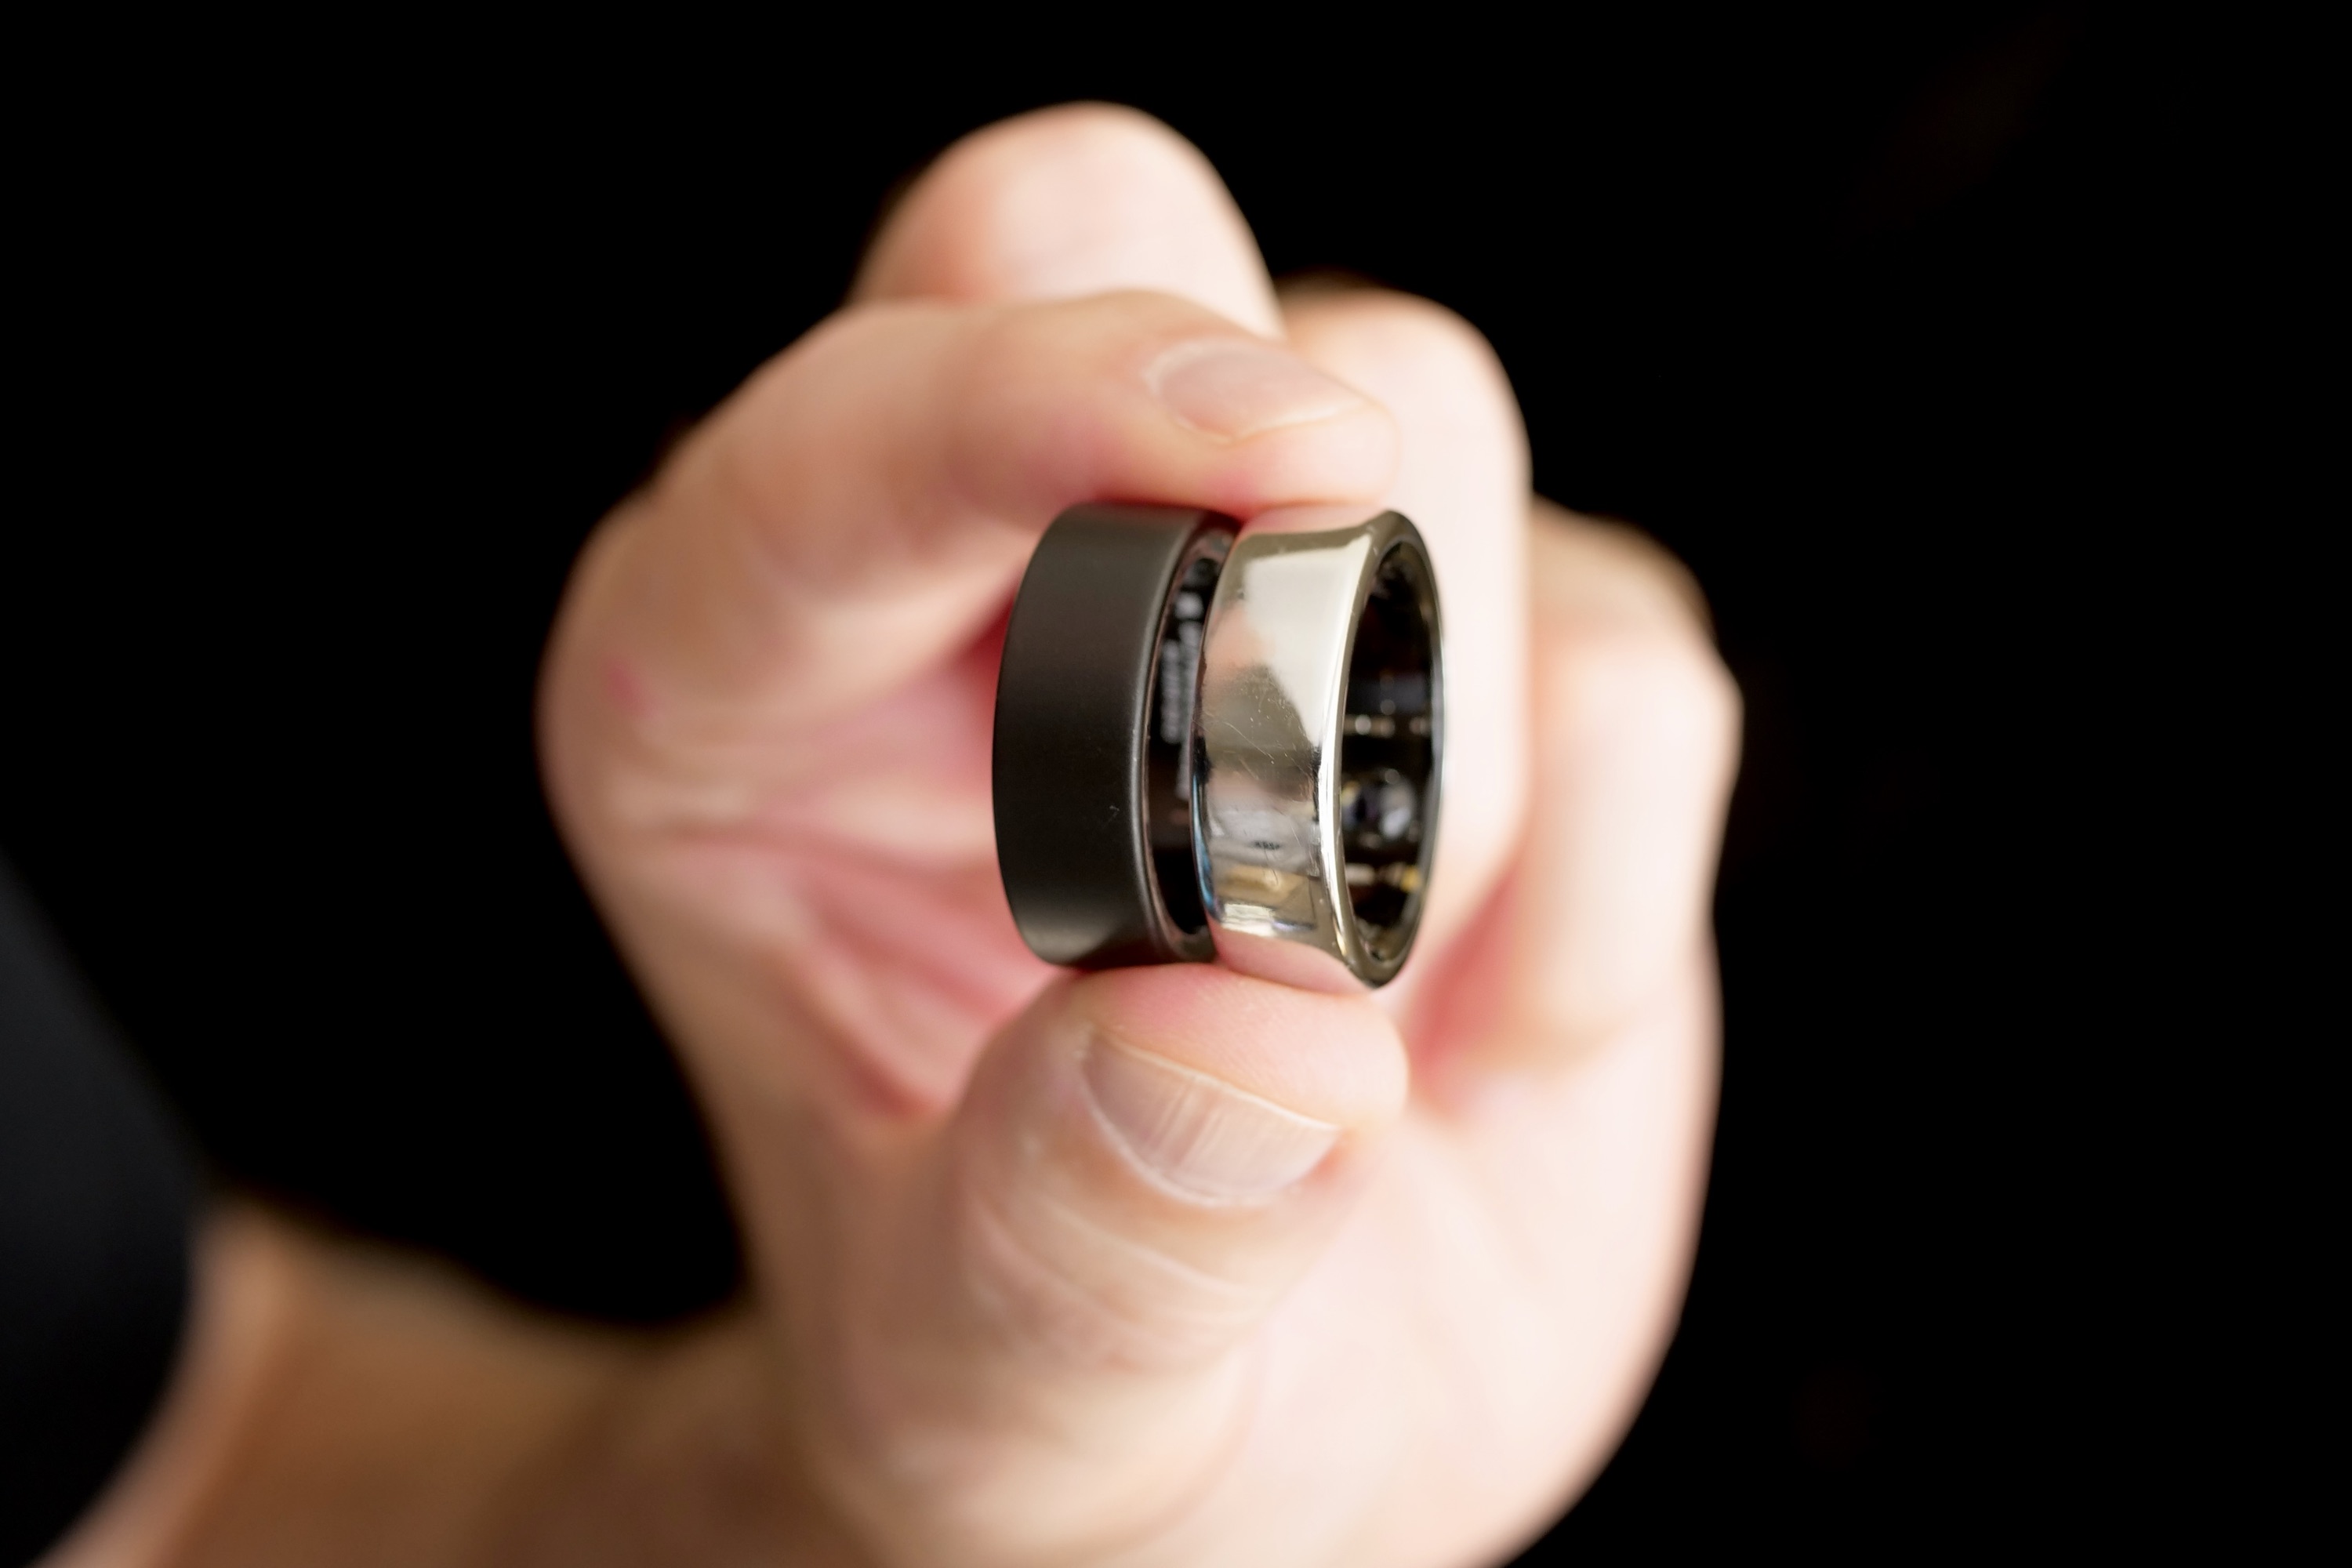 A person holding the Ultrahuman Ring Air and the Oura Ring.